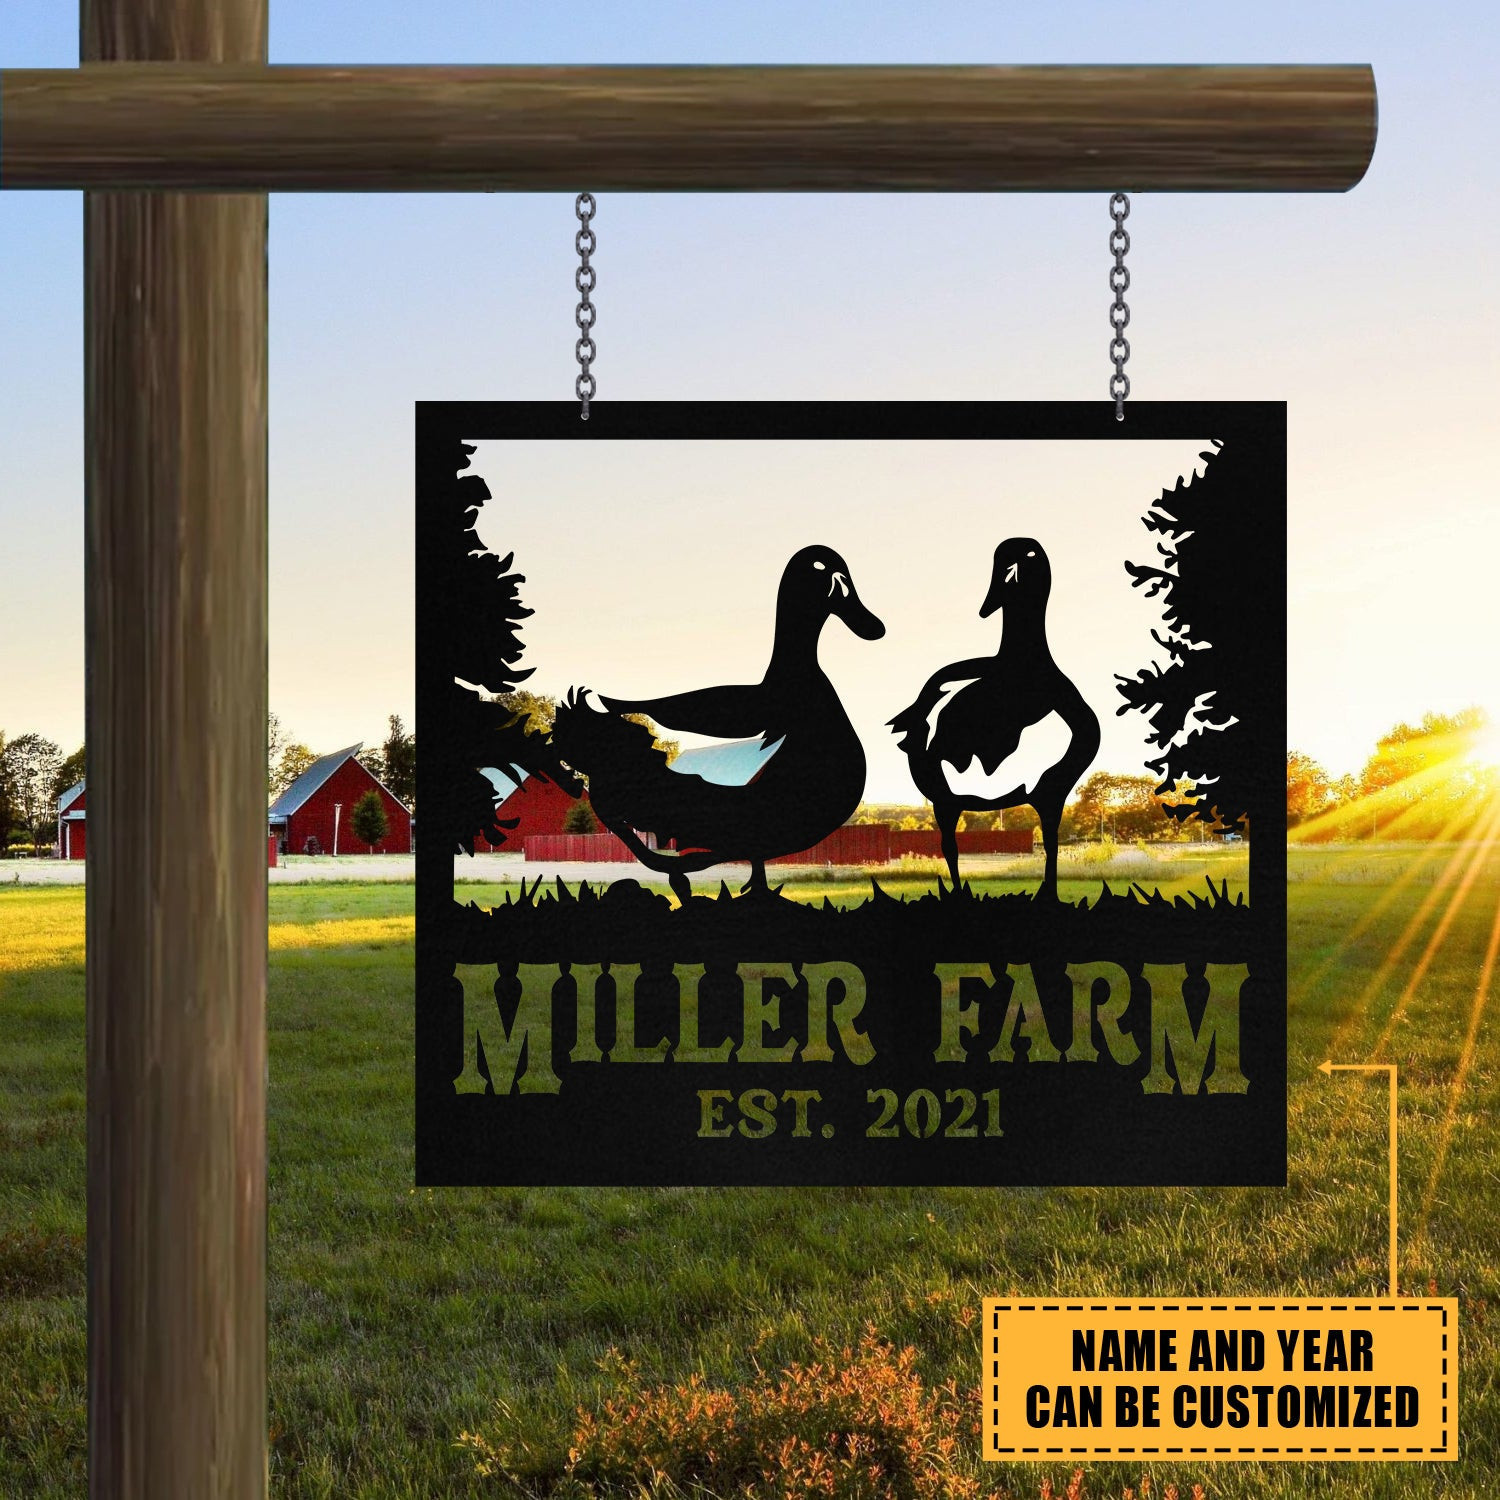 Personalized Metal Farm Sign Duck , Custom Outdoor, Front Gate, Ranch, Stable, Metal Laser Cut Metal Signs Custom Gift Ideas 12x12IN